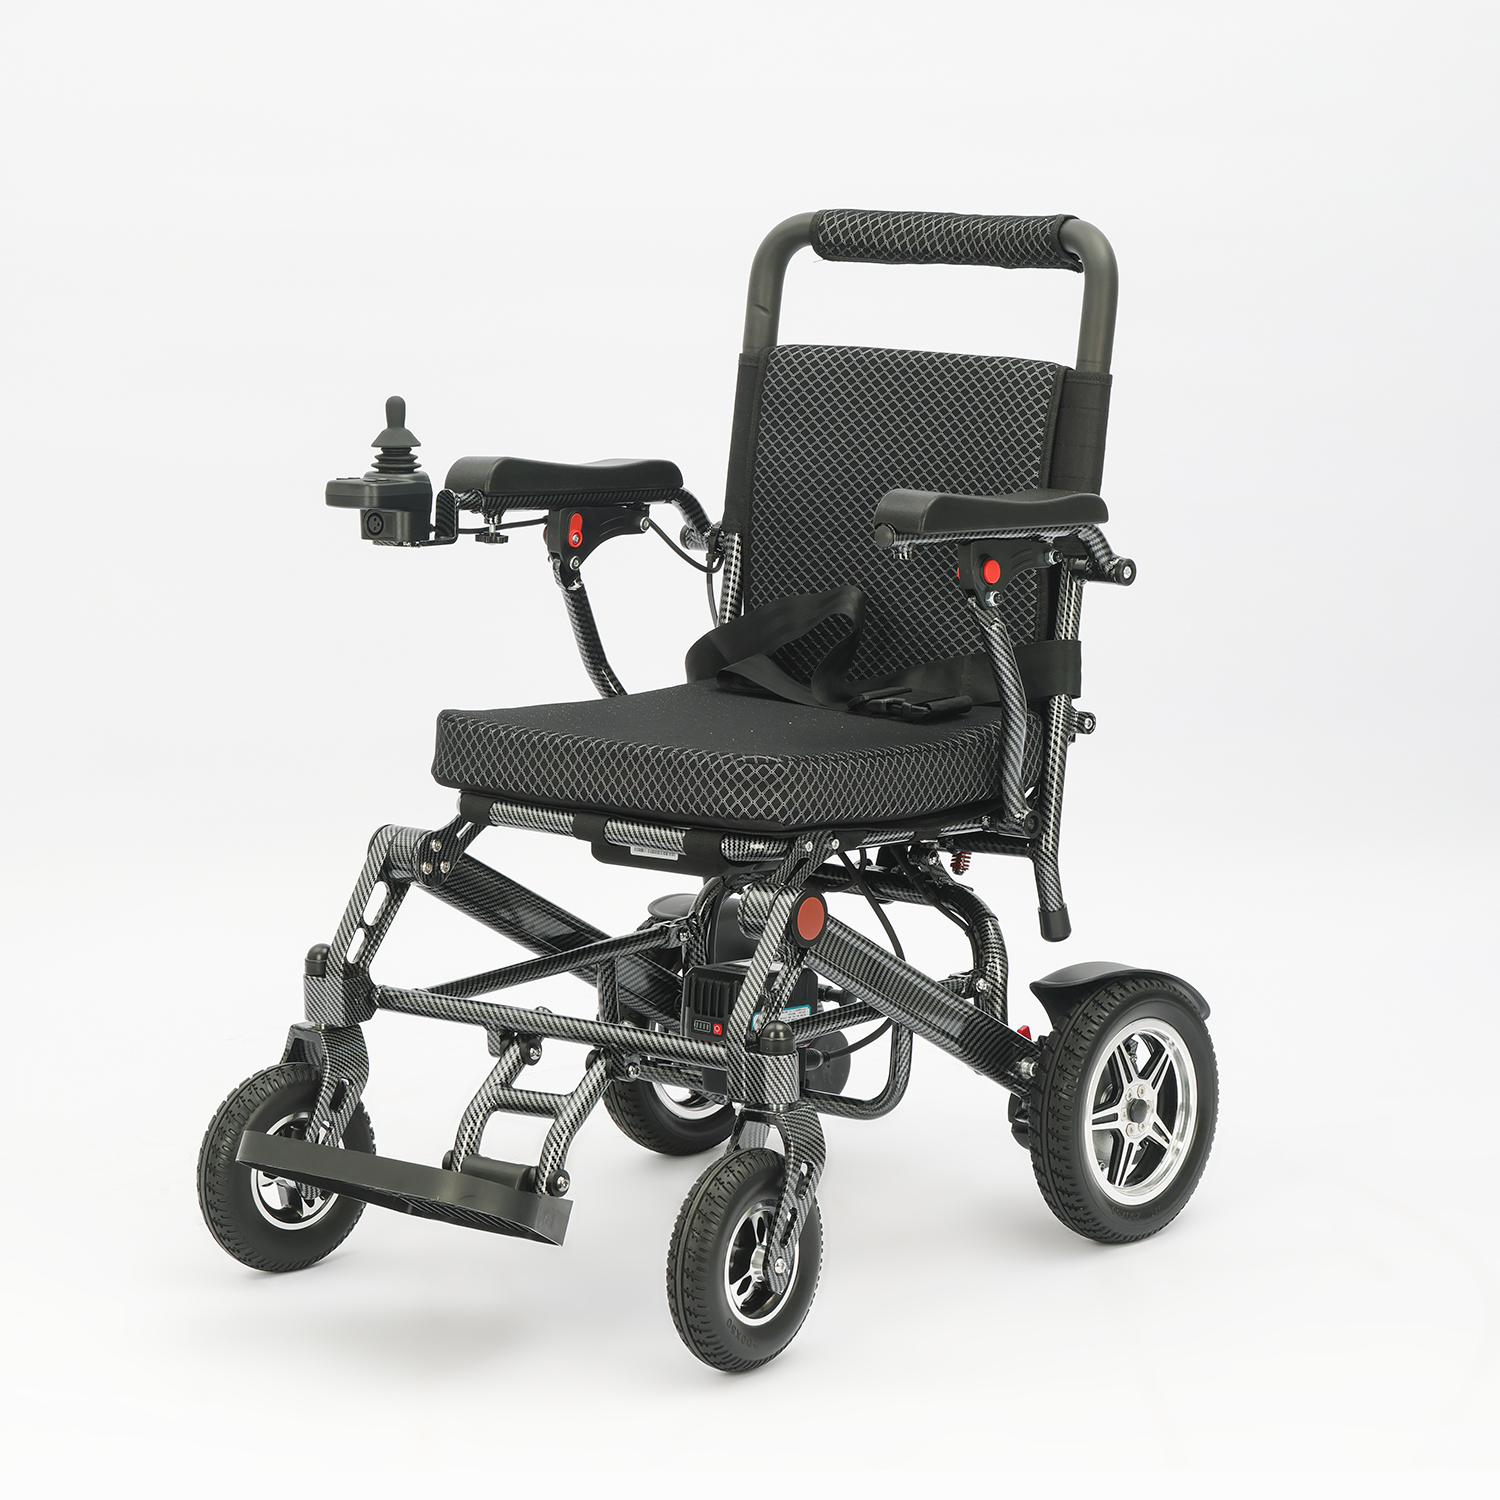 Newly-Designed Lightweight Foldable Wheelchair for Easy Mobility